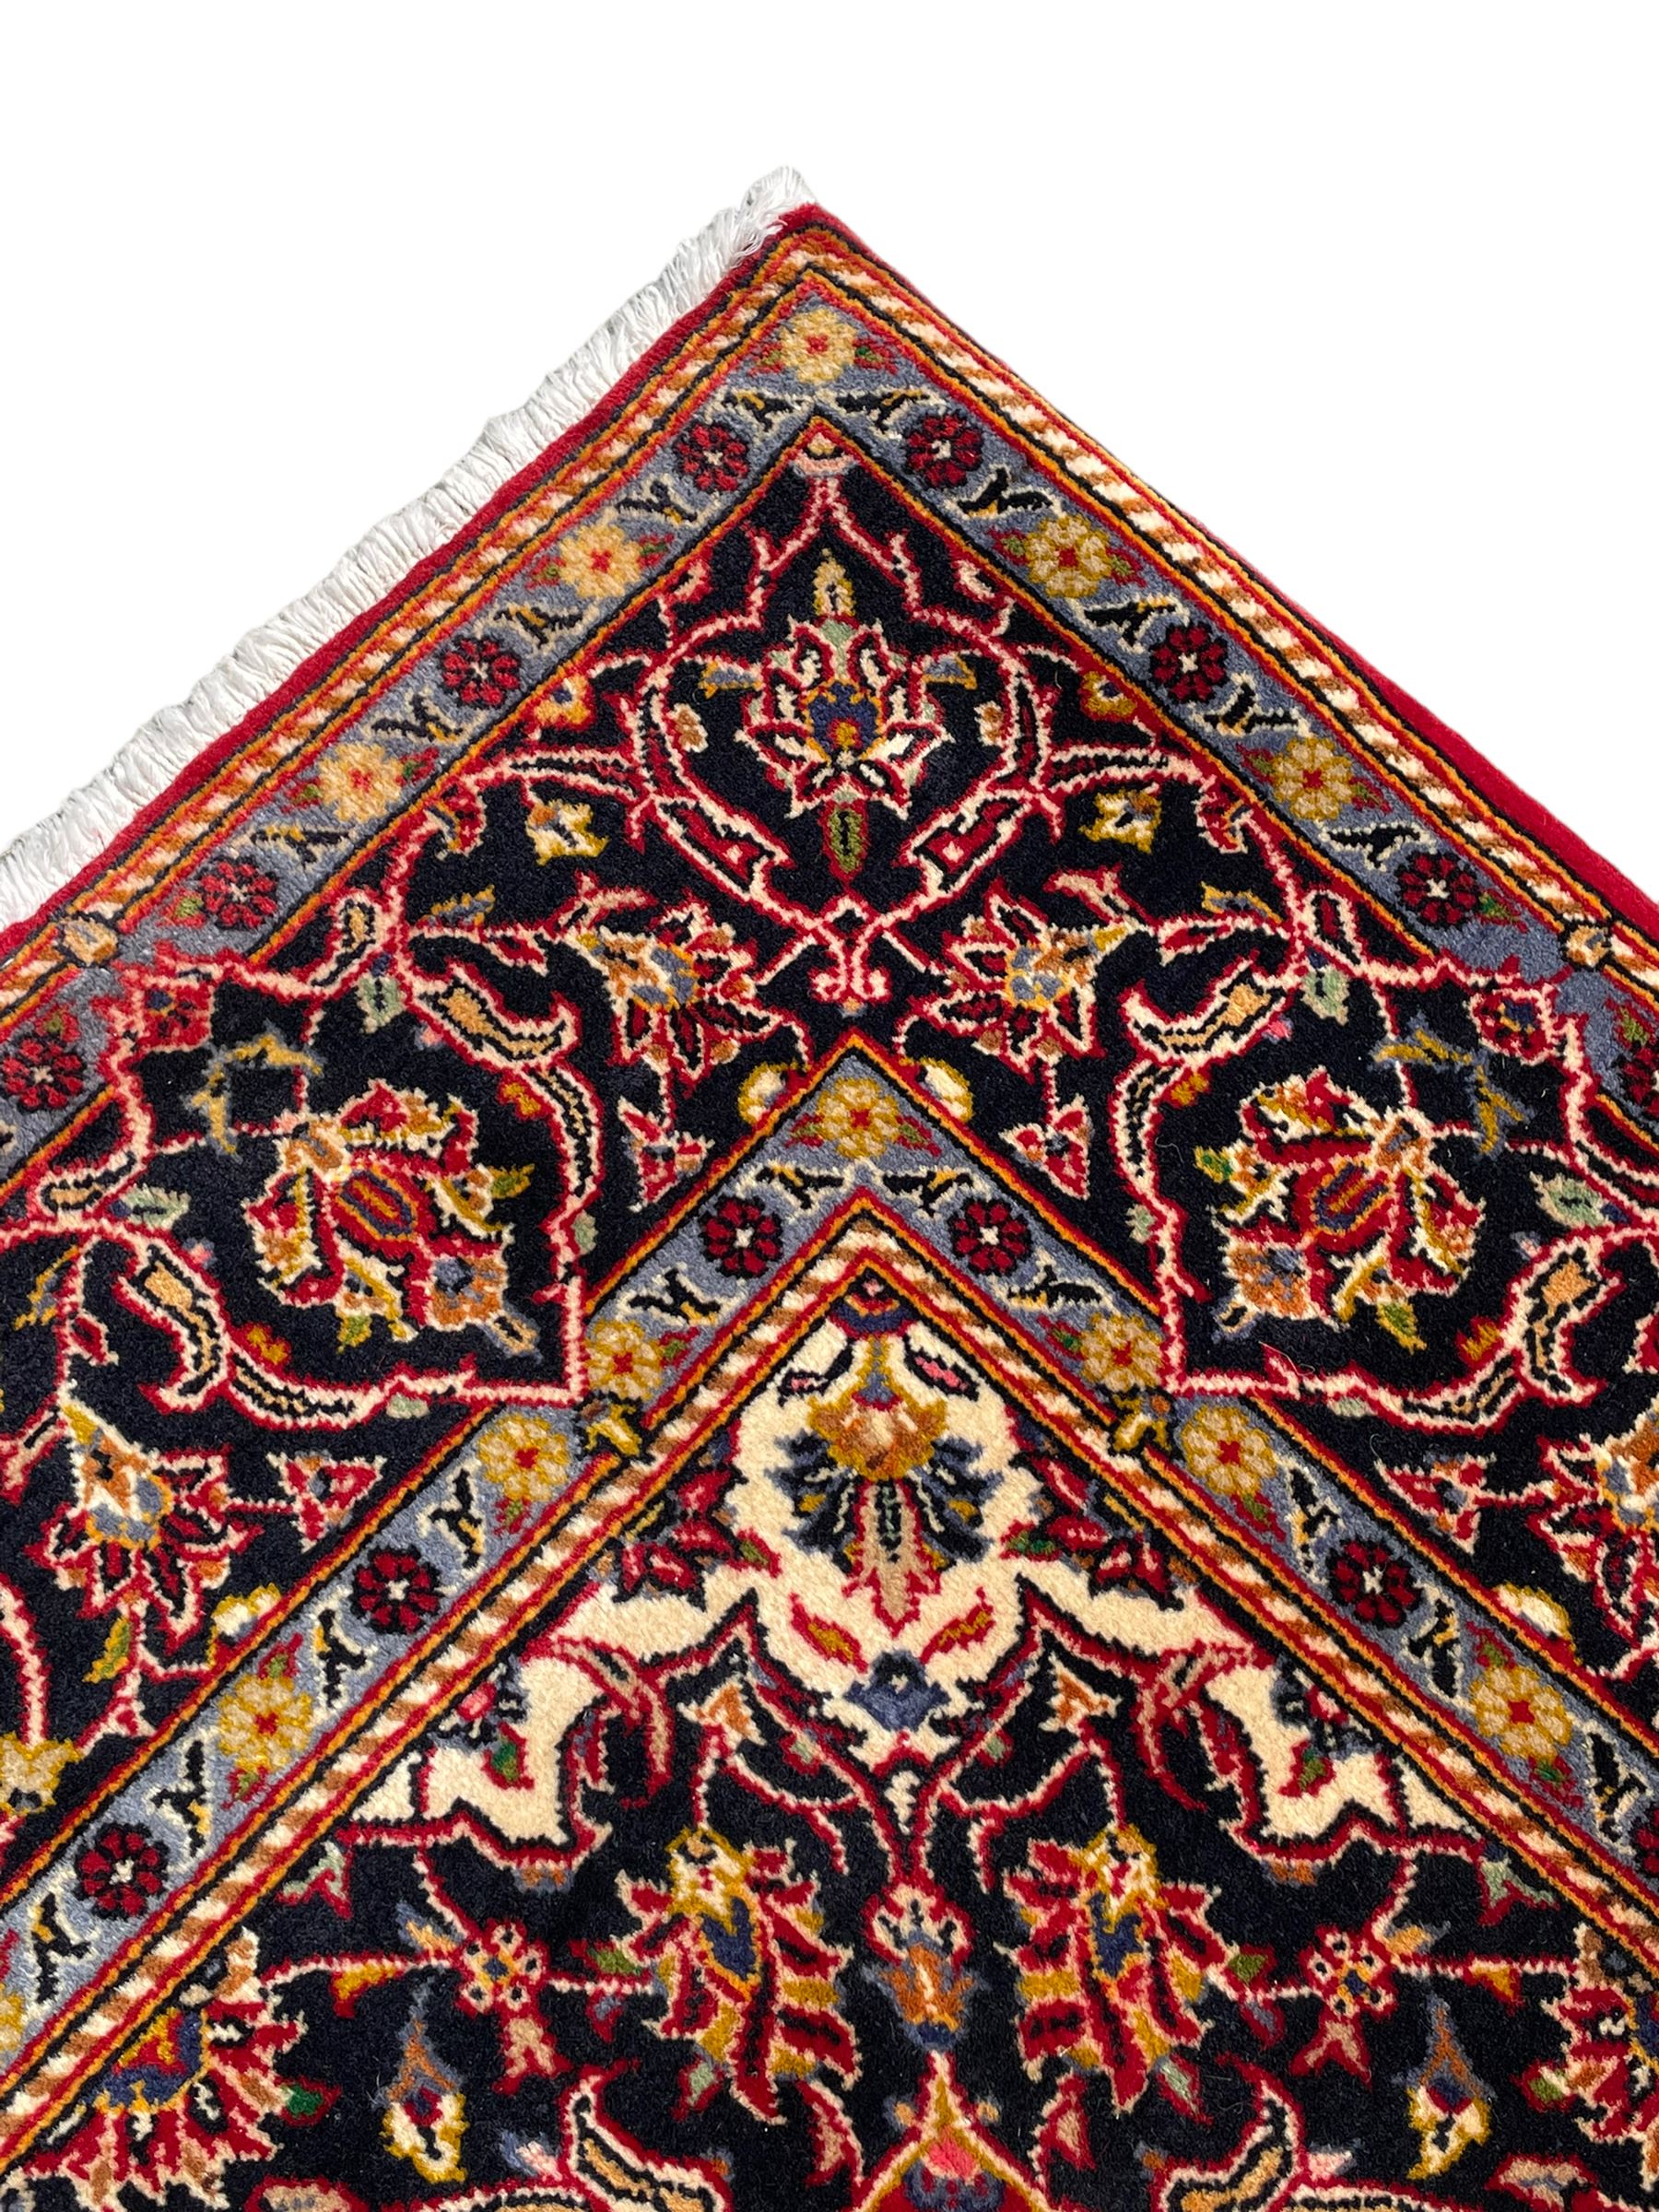 Small Persian Kashan red ground rug - Image 5 of 8